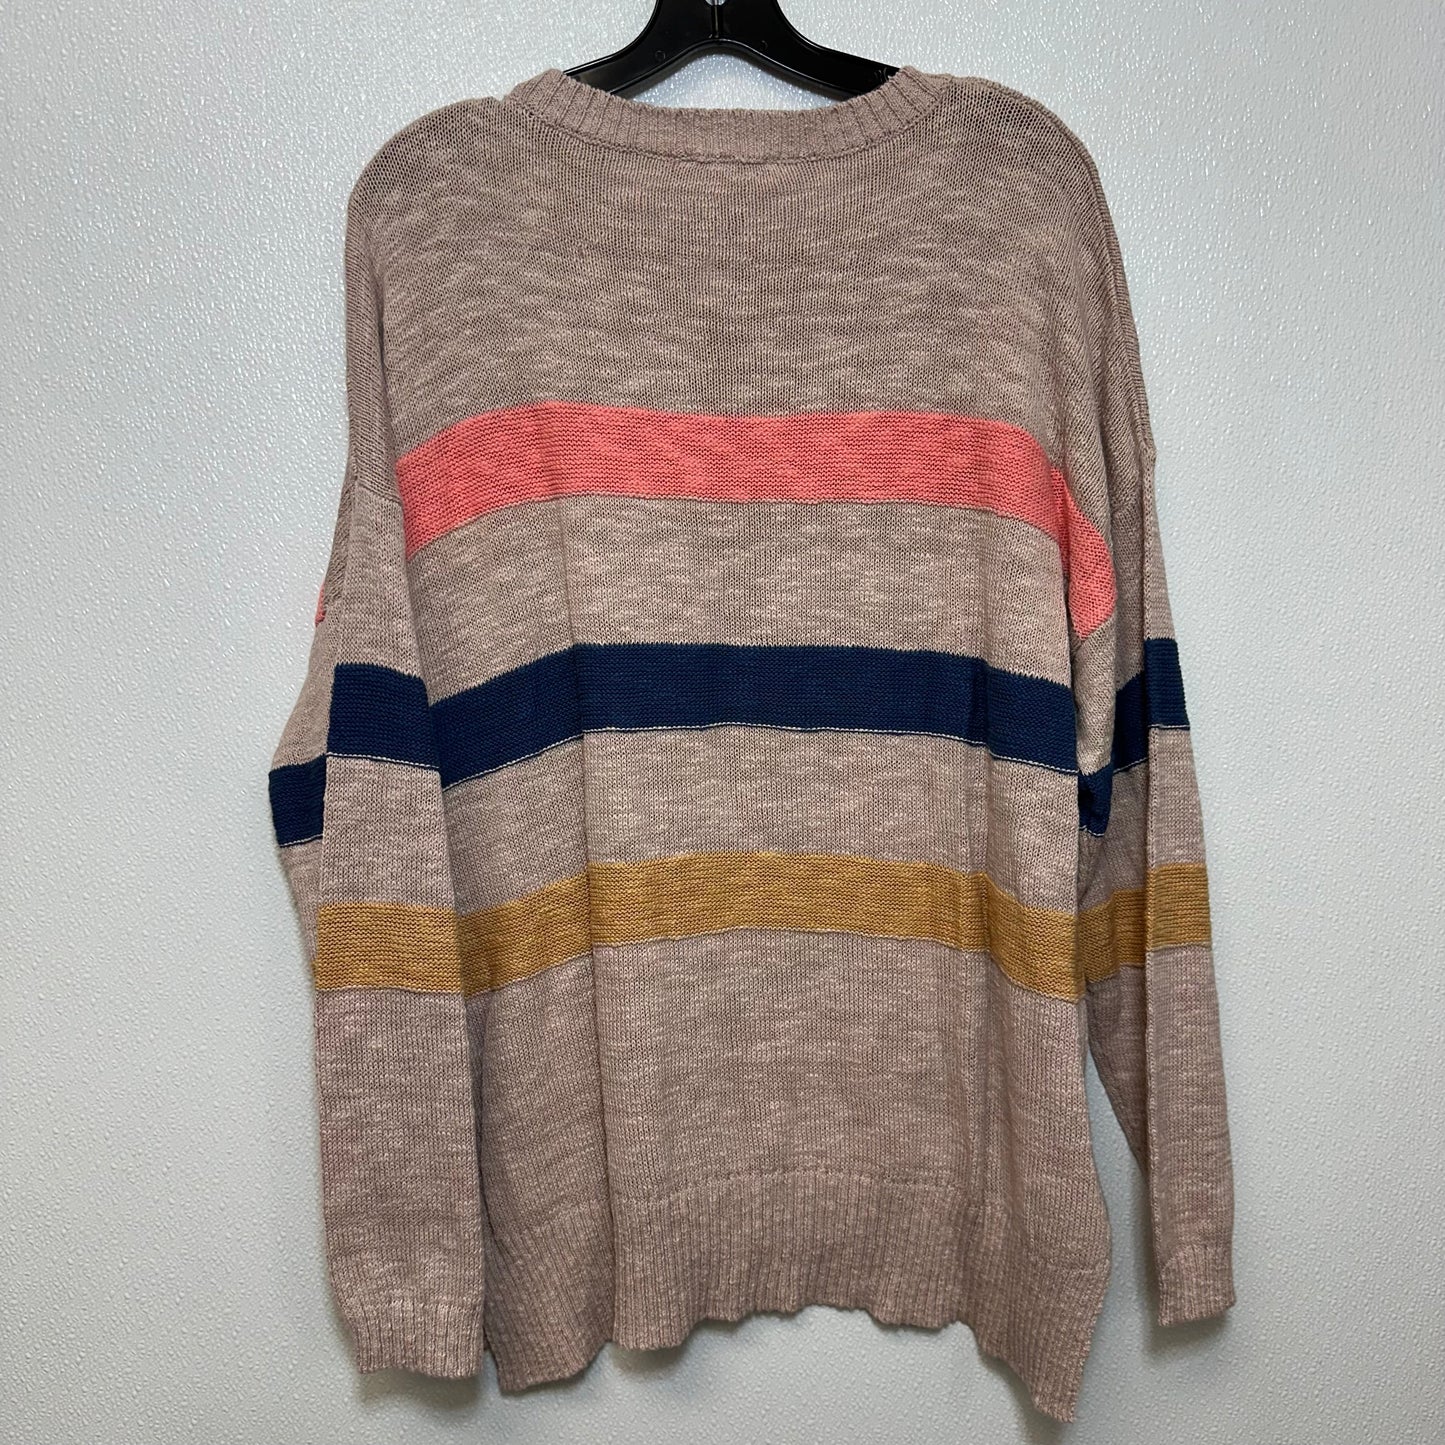 Top Long Sleeve By Easel  Size: 2x